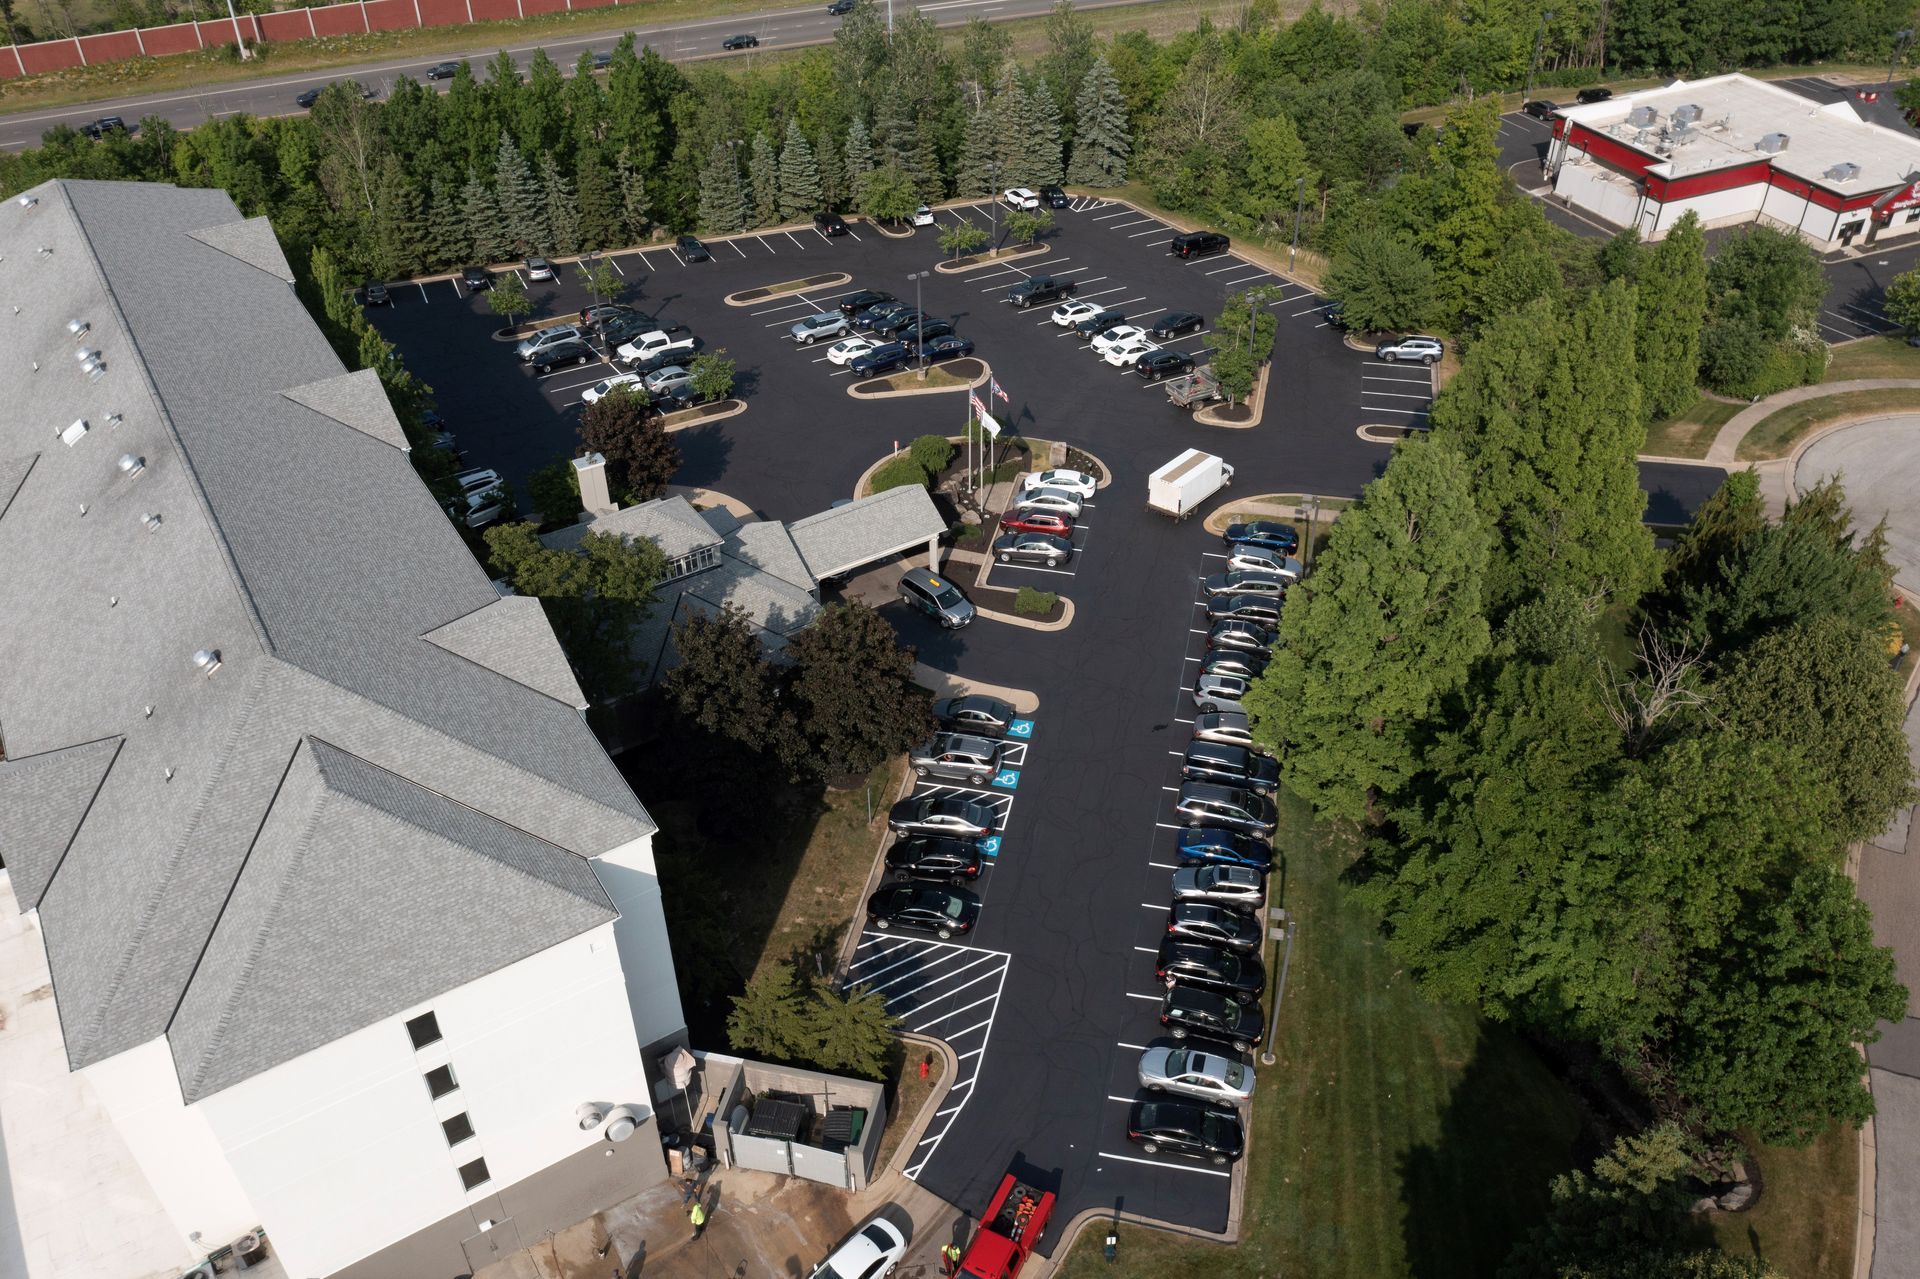 An aerial view of a parking lot with cars parked in front of a building.